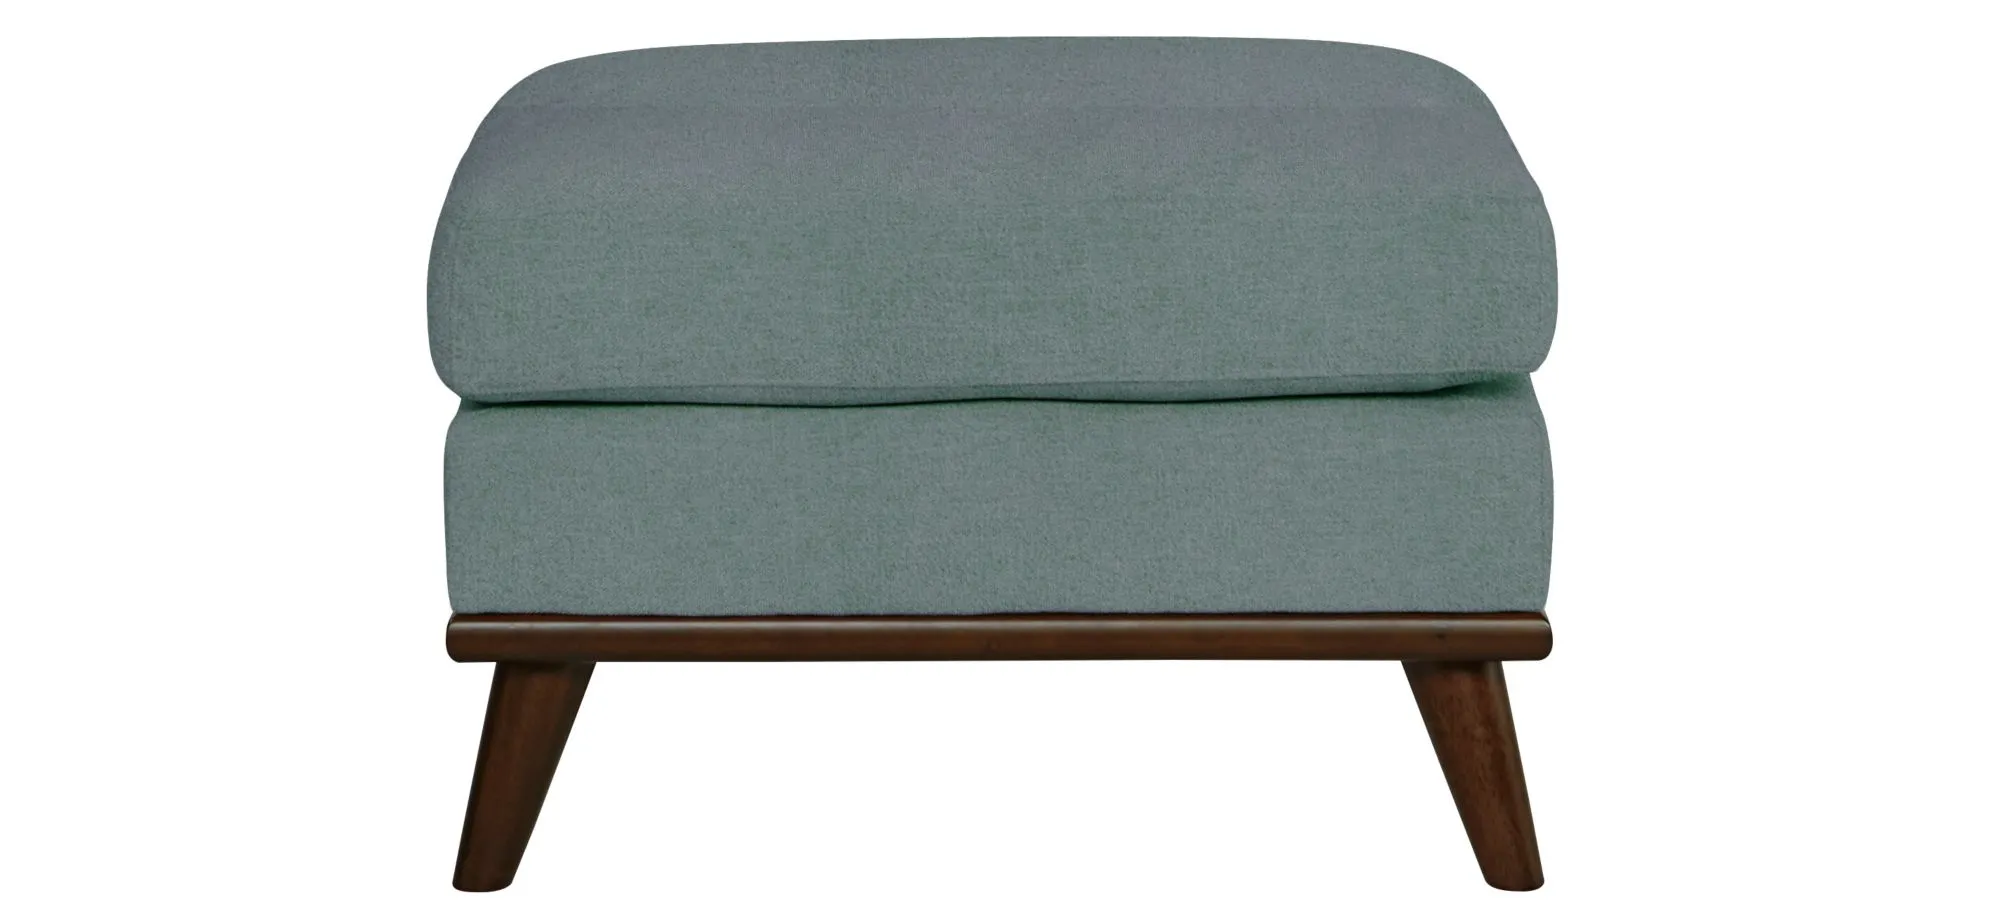 Milo Ottoman in Suede-So-Soft Hydra by H.M. Richards